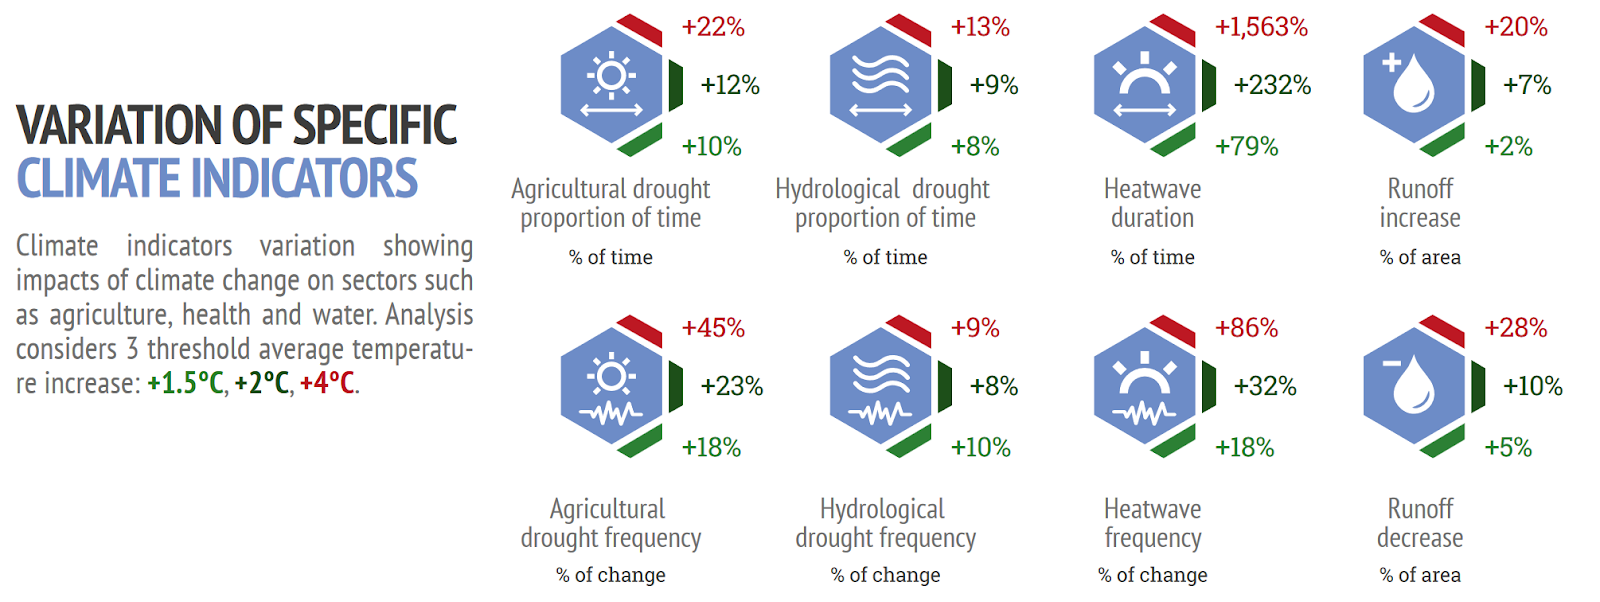 variation of specific climate indicators
Source: CMCC